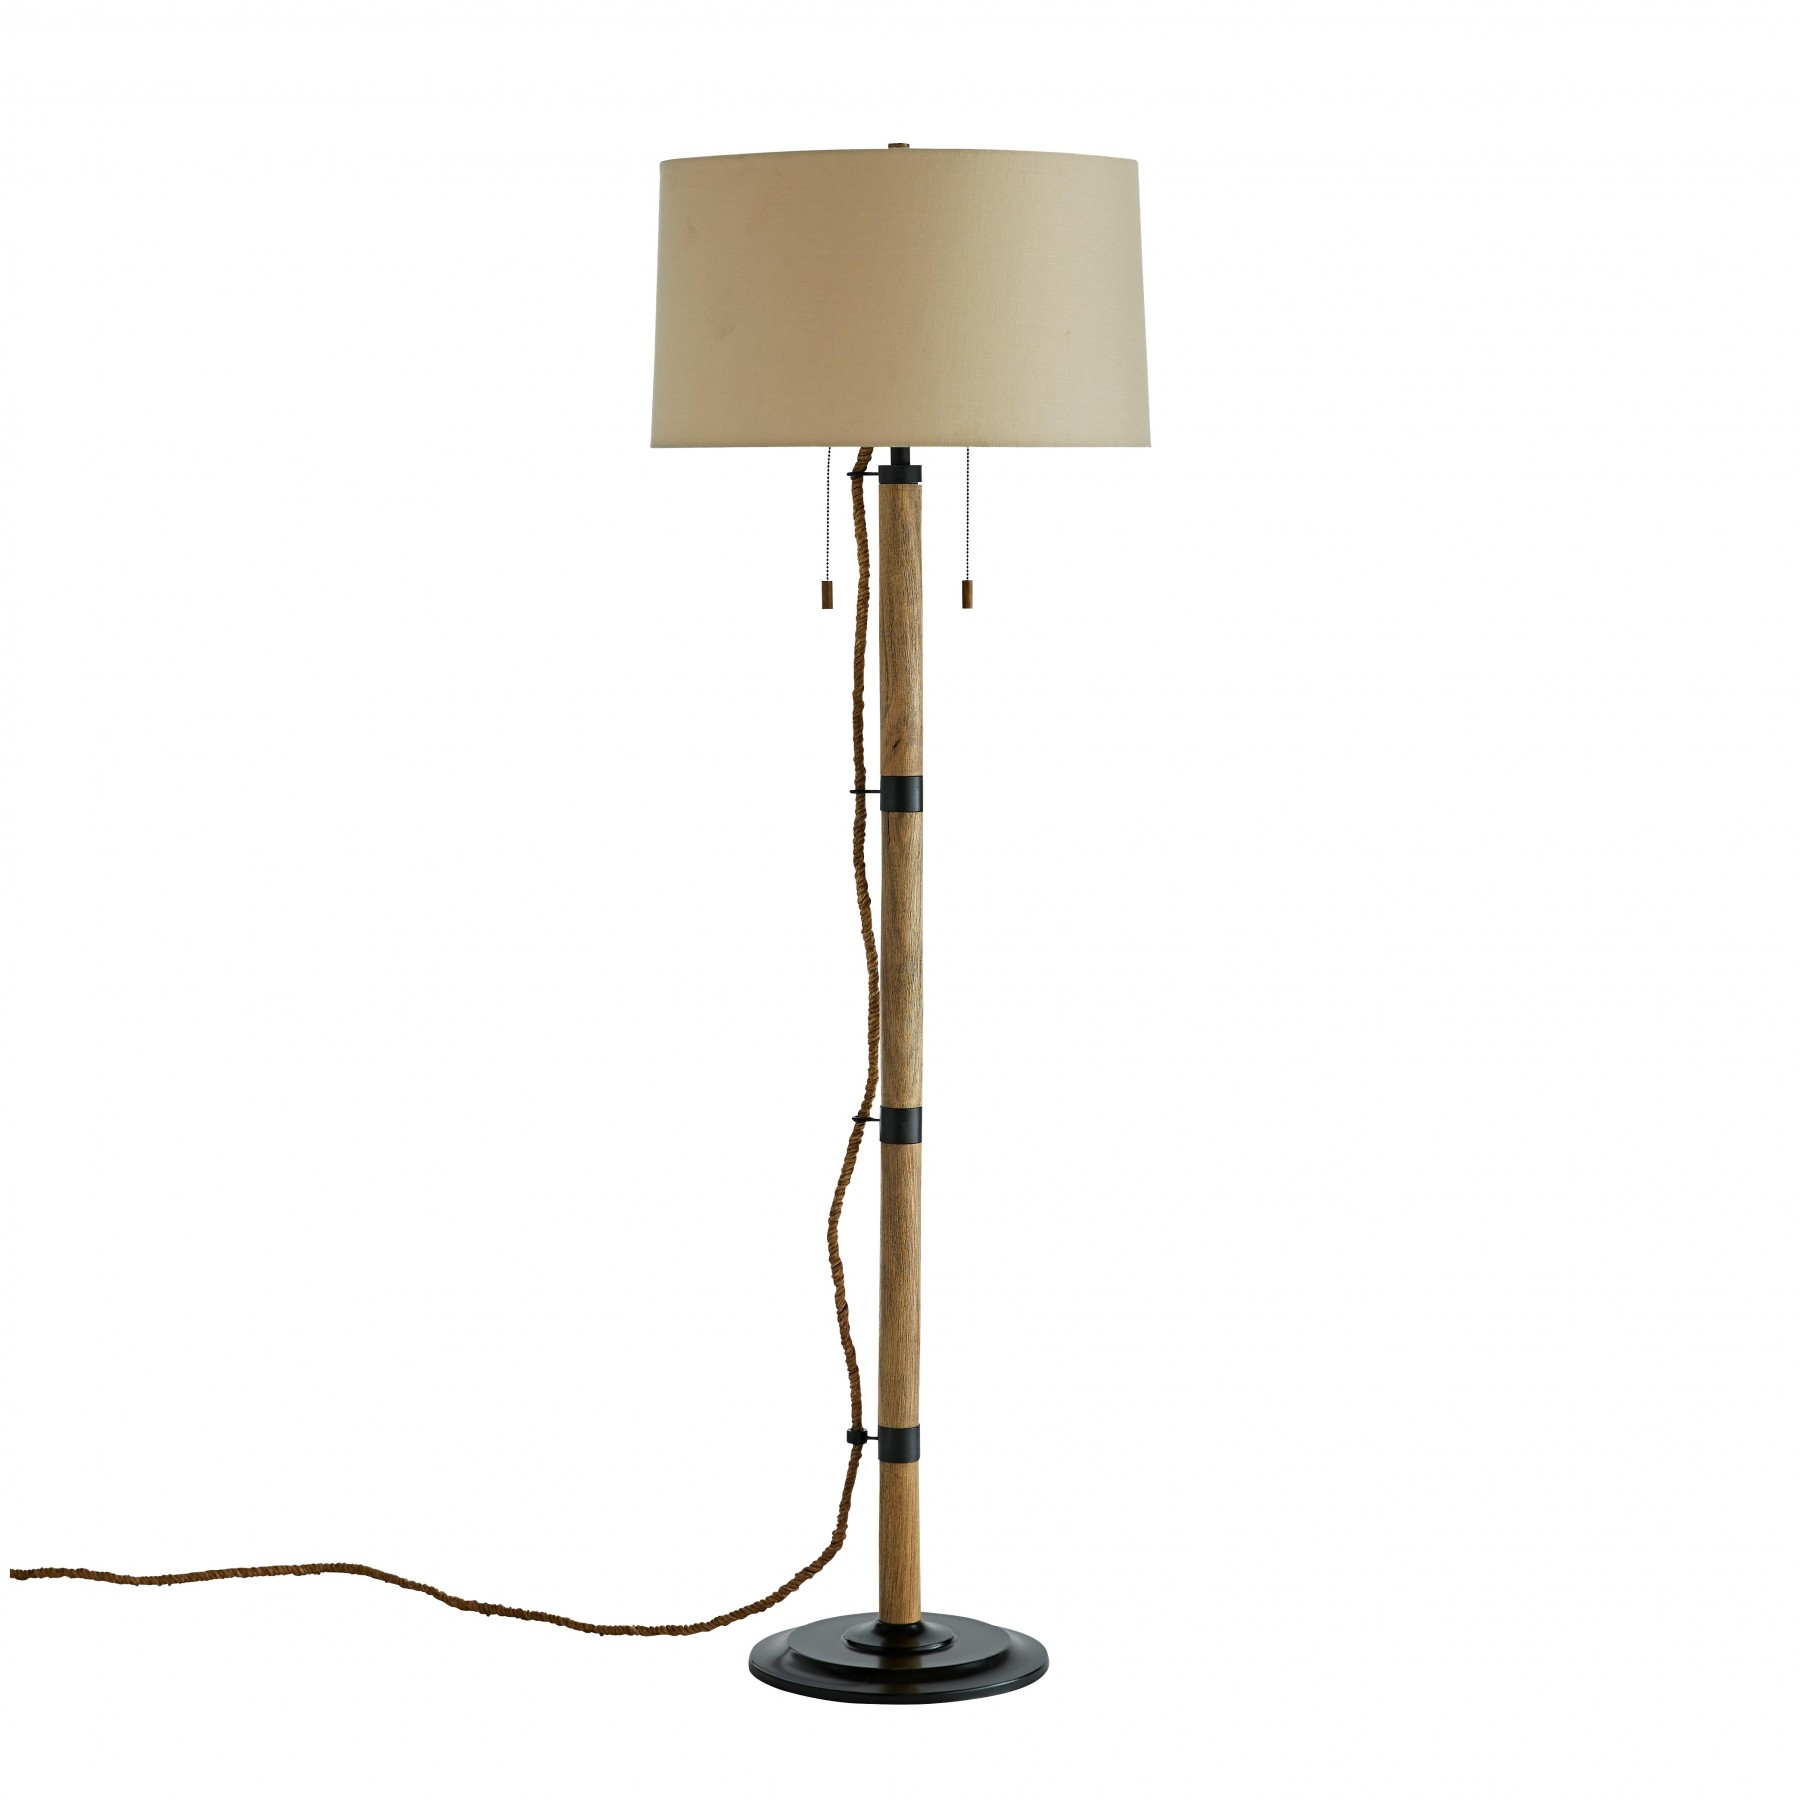 Vik Floor Lamp intended for sizing 1800 X 1800